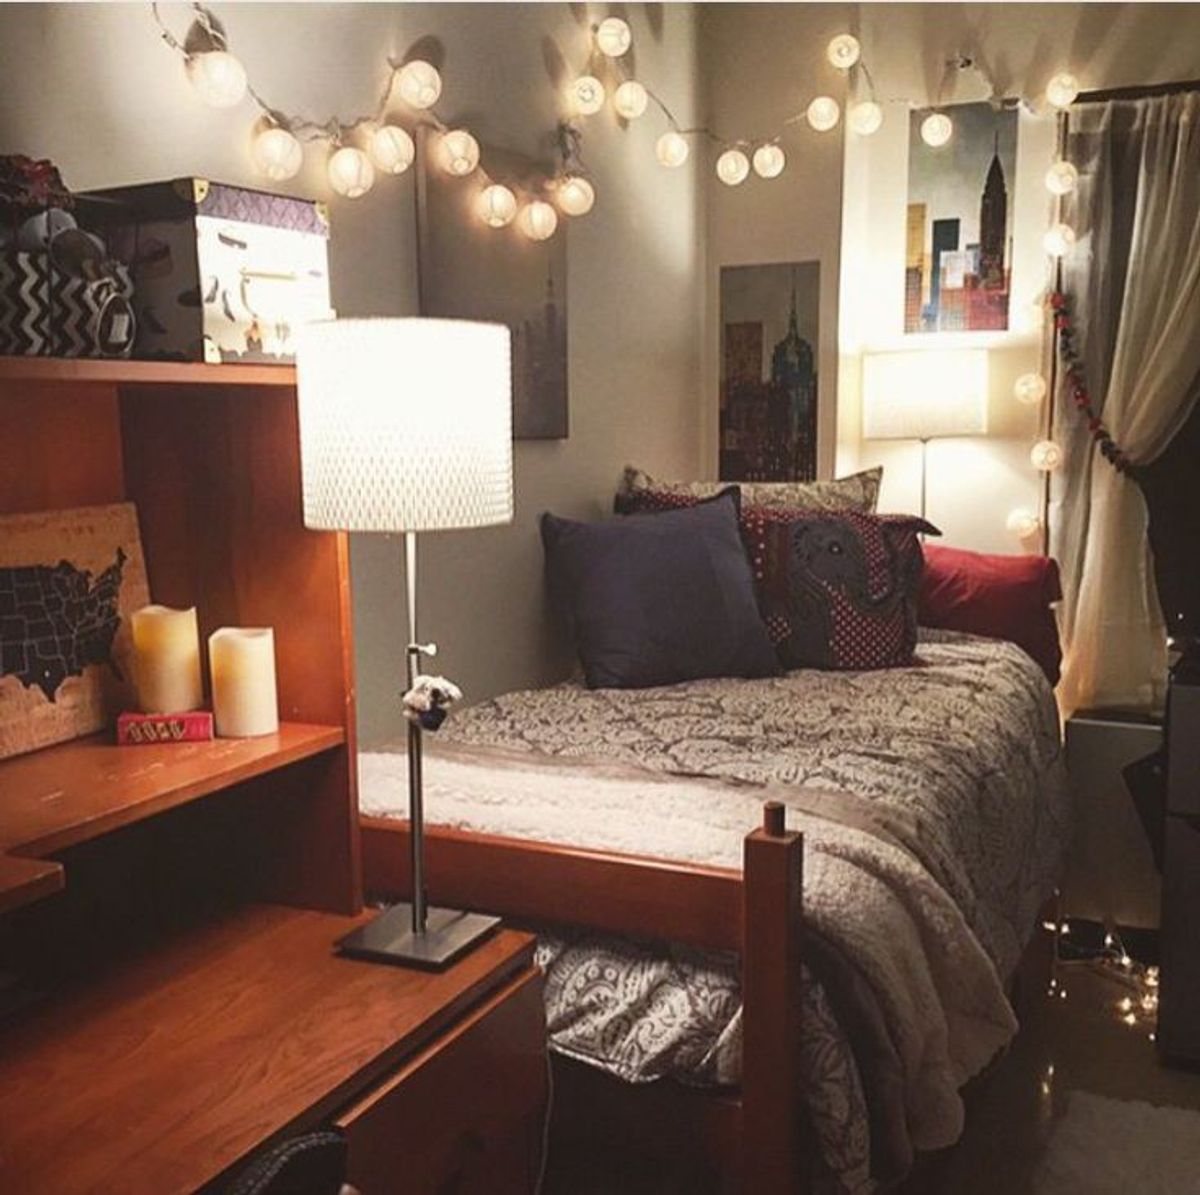 How To Make Your Dorm Room Look Bigger